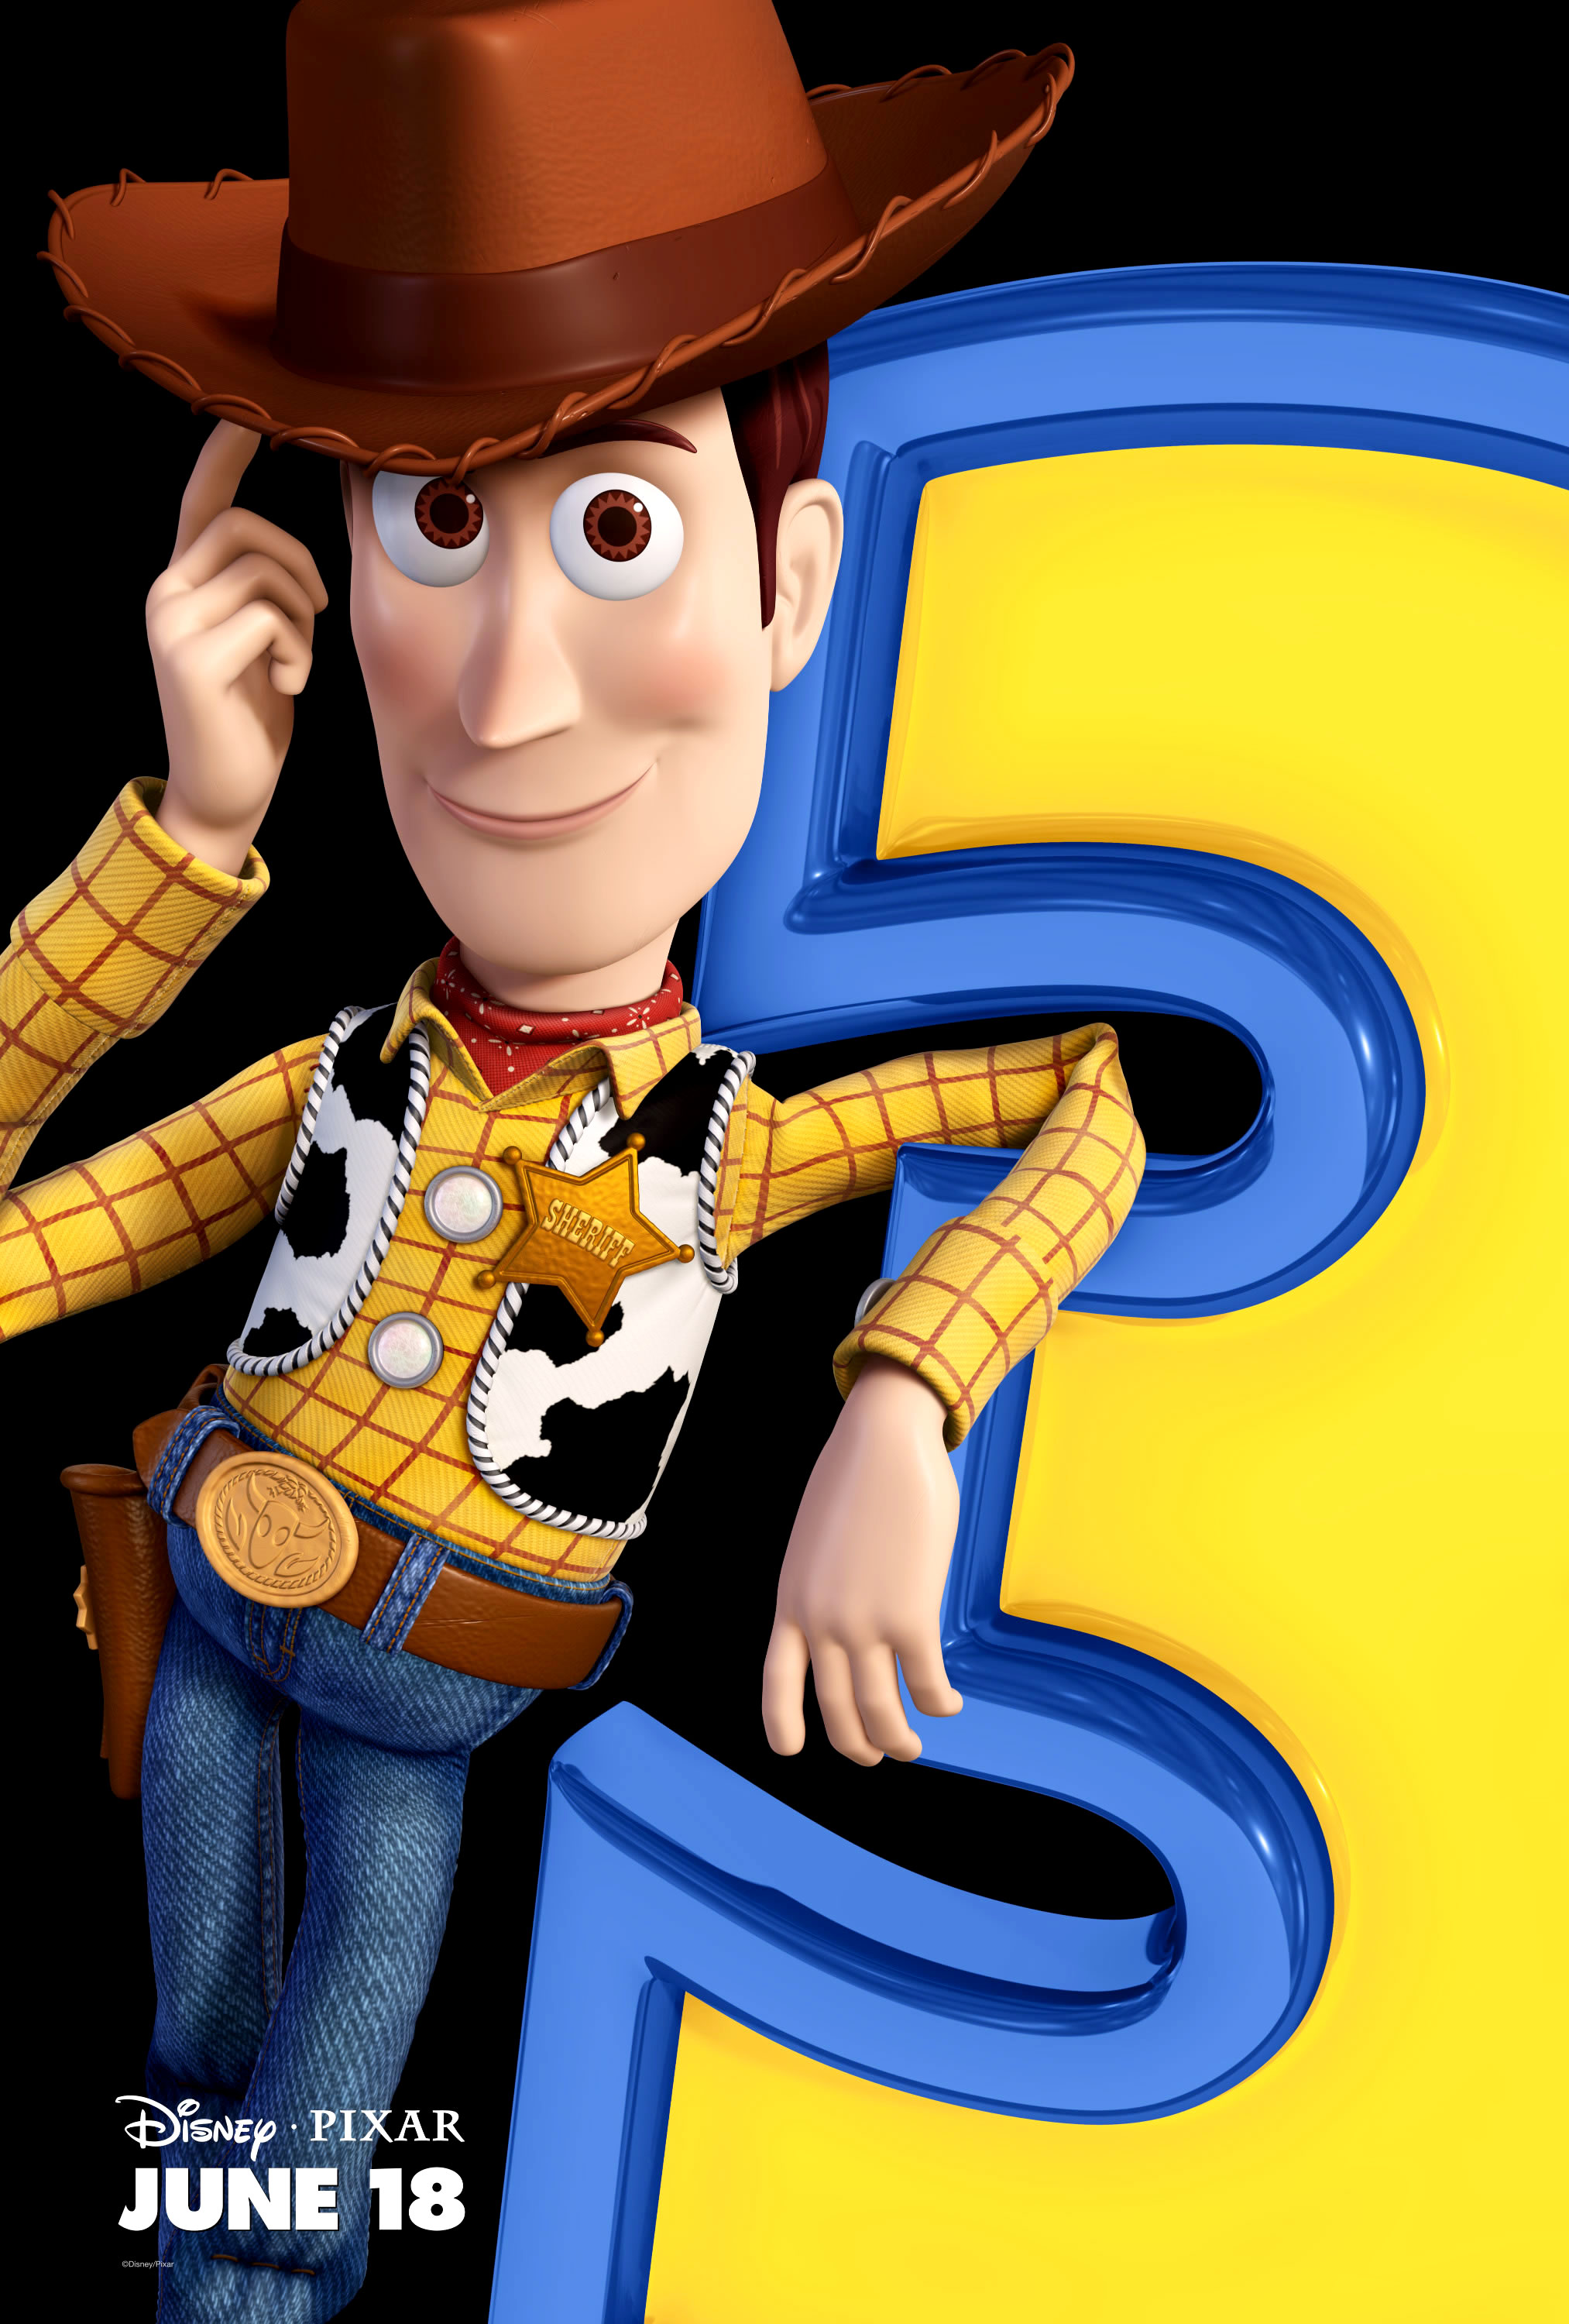 Toy Story 3 free